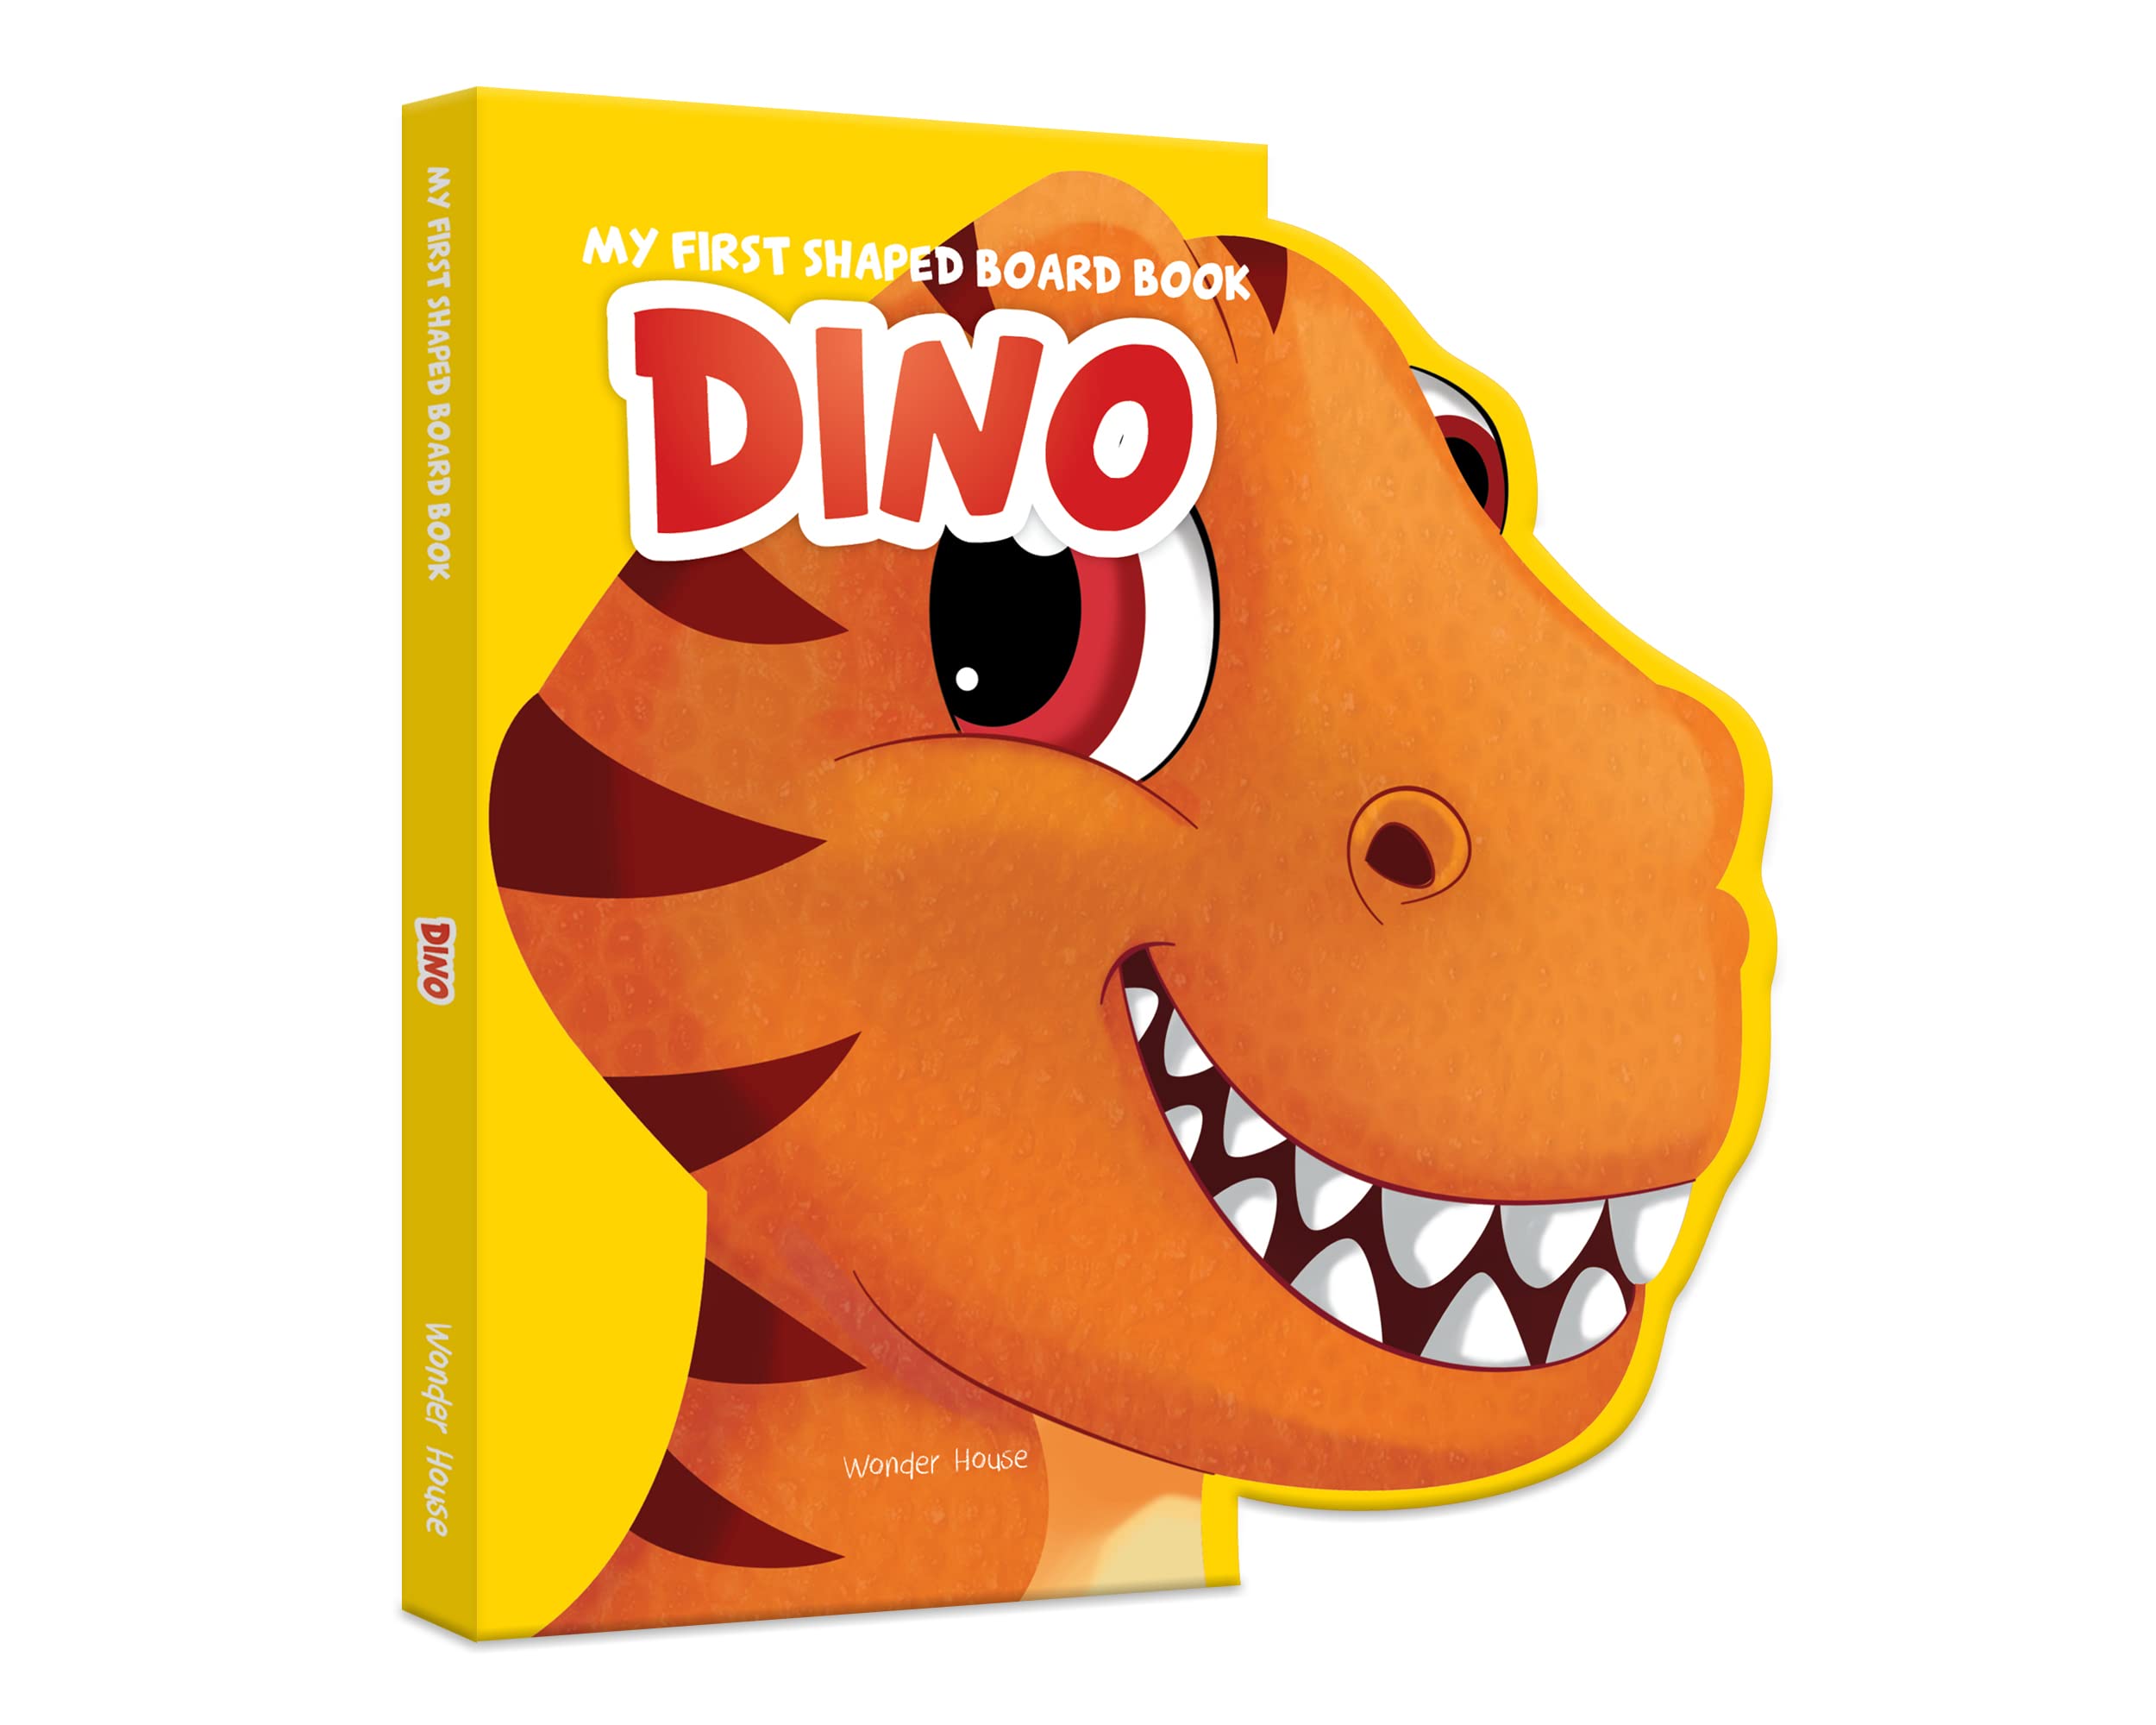 Copy of My First Shaped Board book - Dino